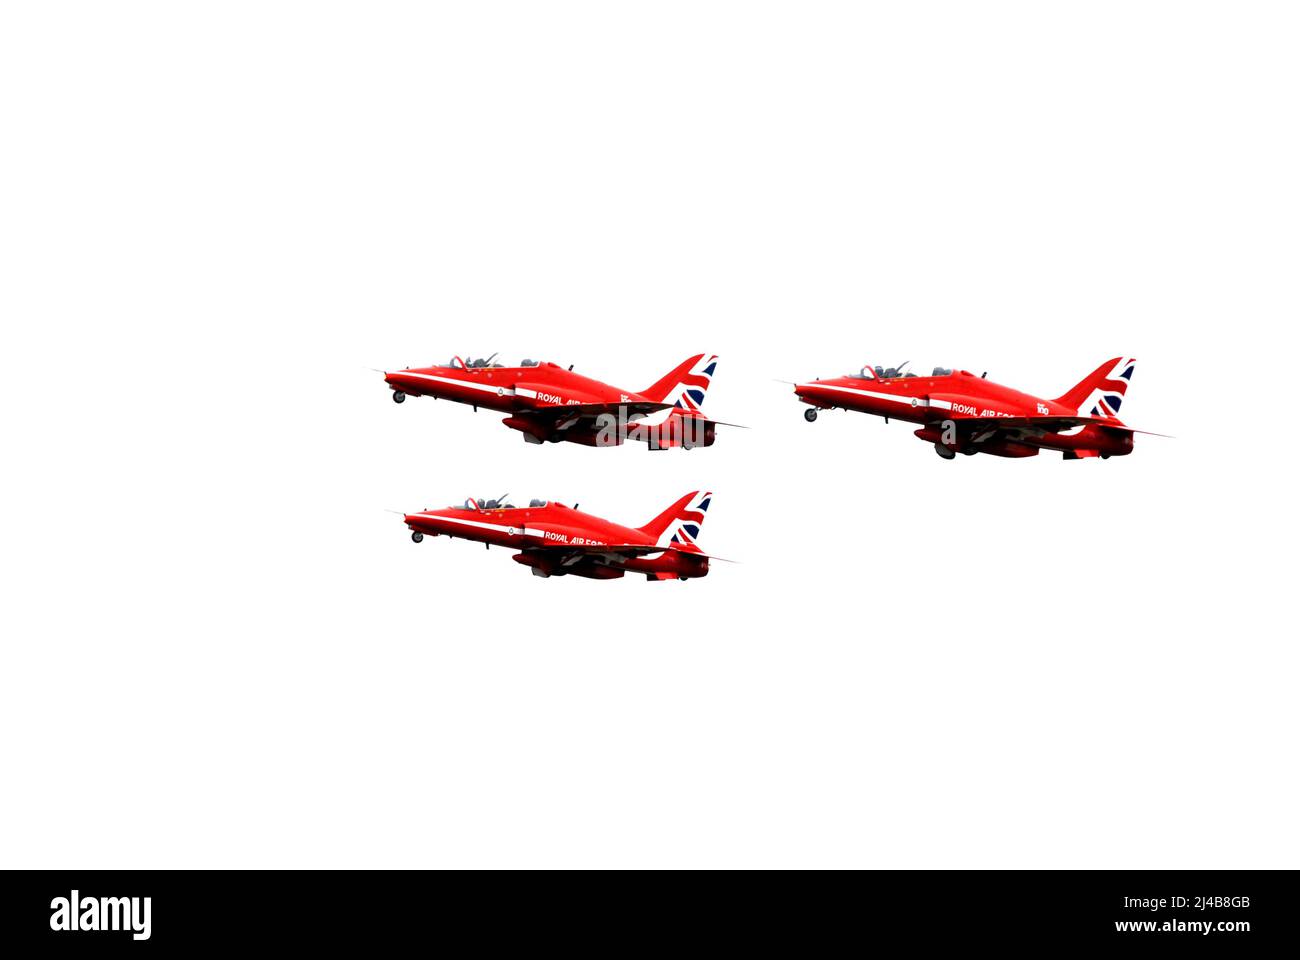 Three Red Arrows Hawk aircraft just after take-off with undercarriage still retracting, at Biggin Hill airshow Stock Photo